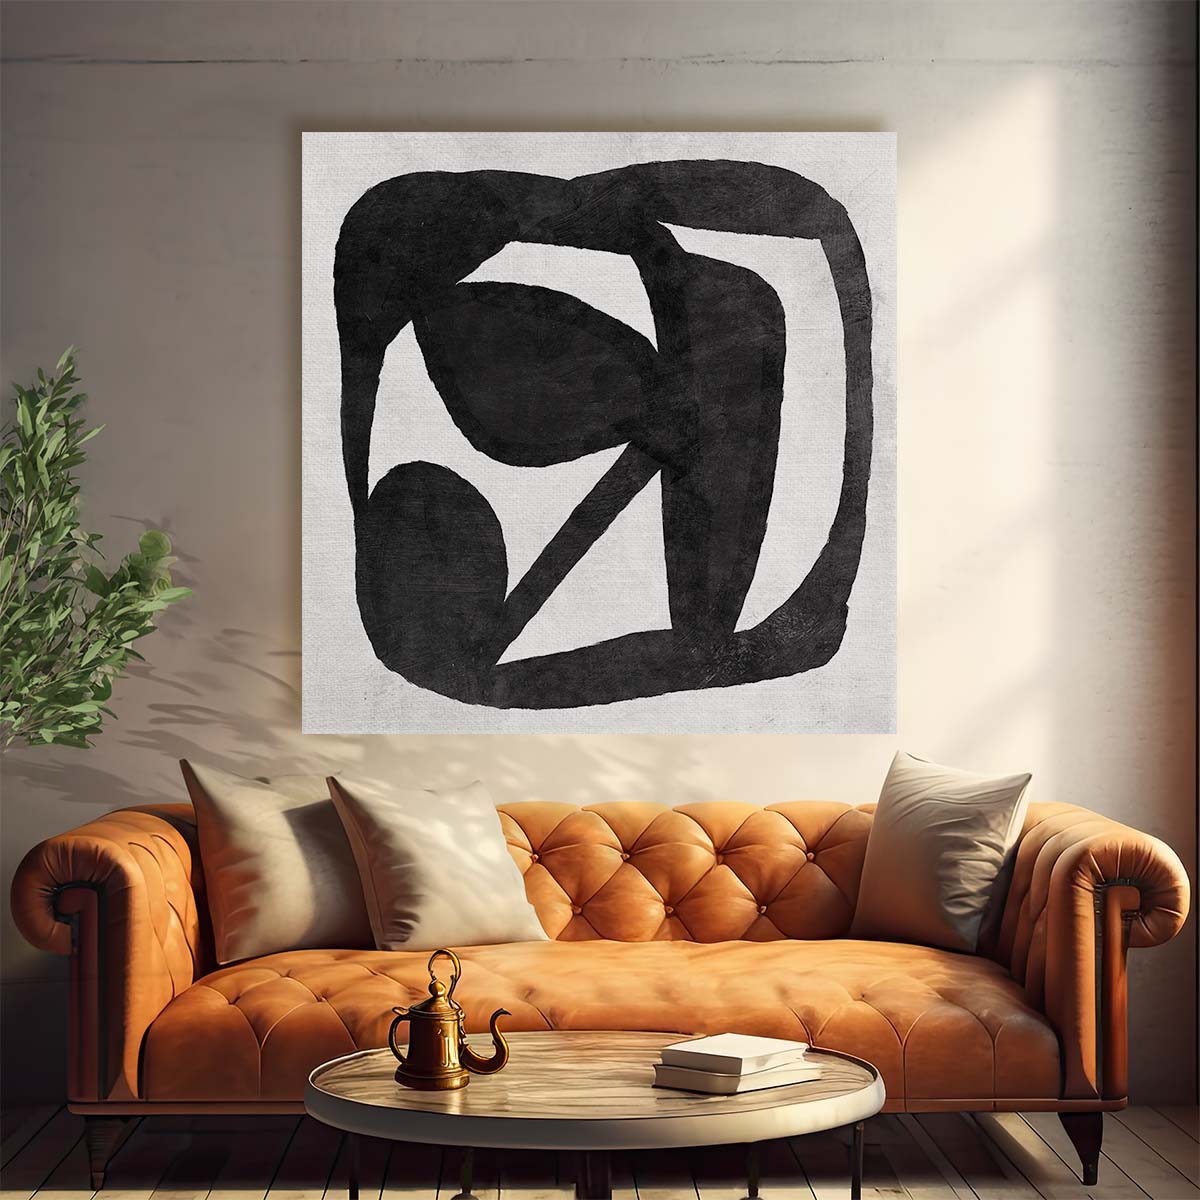 Dan Hobday Modern Minimalist Abstract Melody Brush Stroke Illustration Wall Art by Luxuriance Designs. Made in USA.